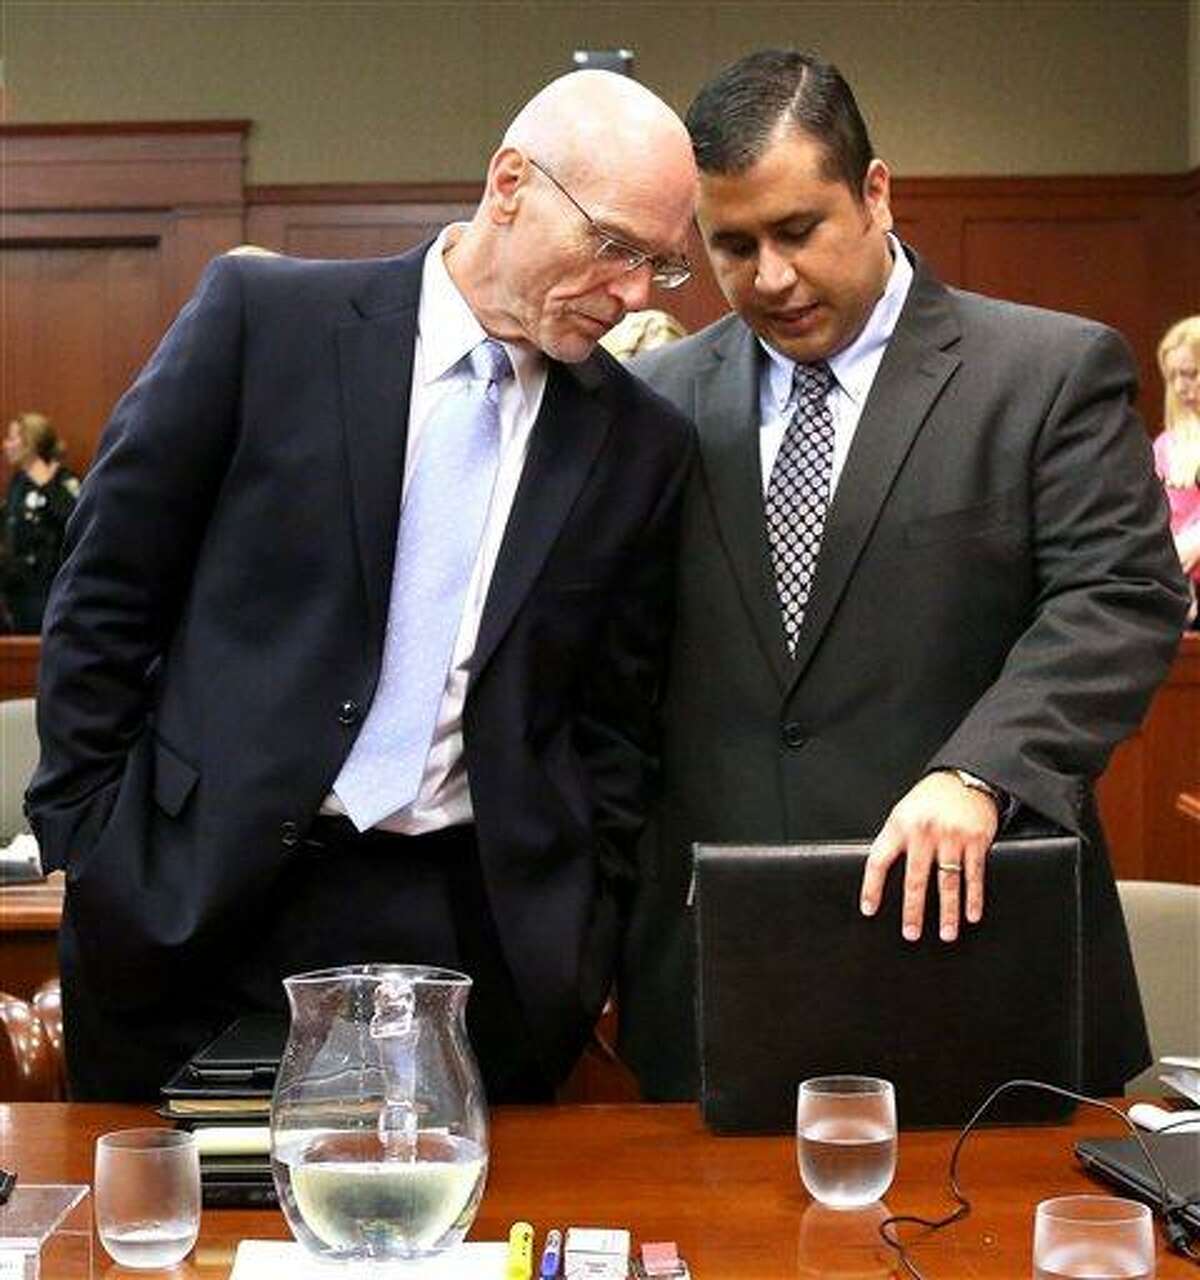 George Zimmerman, right, talks with defense attorney Don West in Seminole circuit court in Sanford, Fla., Monday, June 24, 2013. Zimmerman has been charged with second-degree murder for the 2012 shooting death of Trayvon Martin. (AP Photo/Orlando Sentinel, Joe Burbank,Pool)